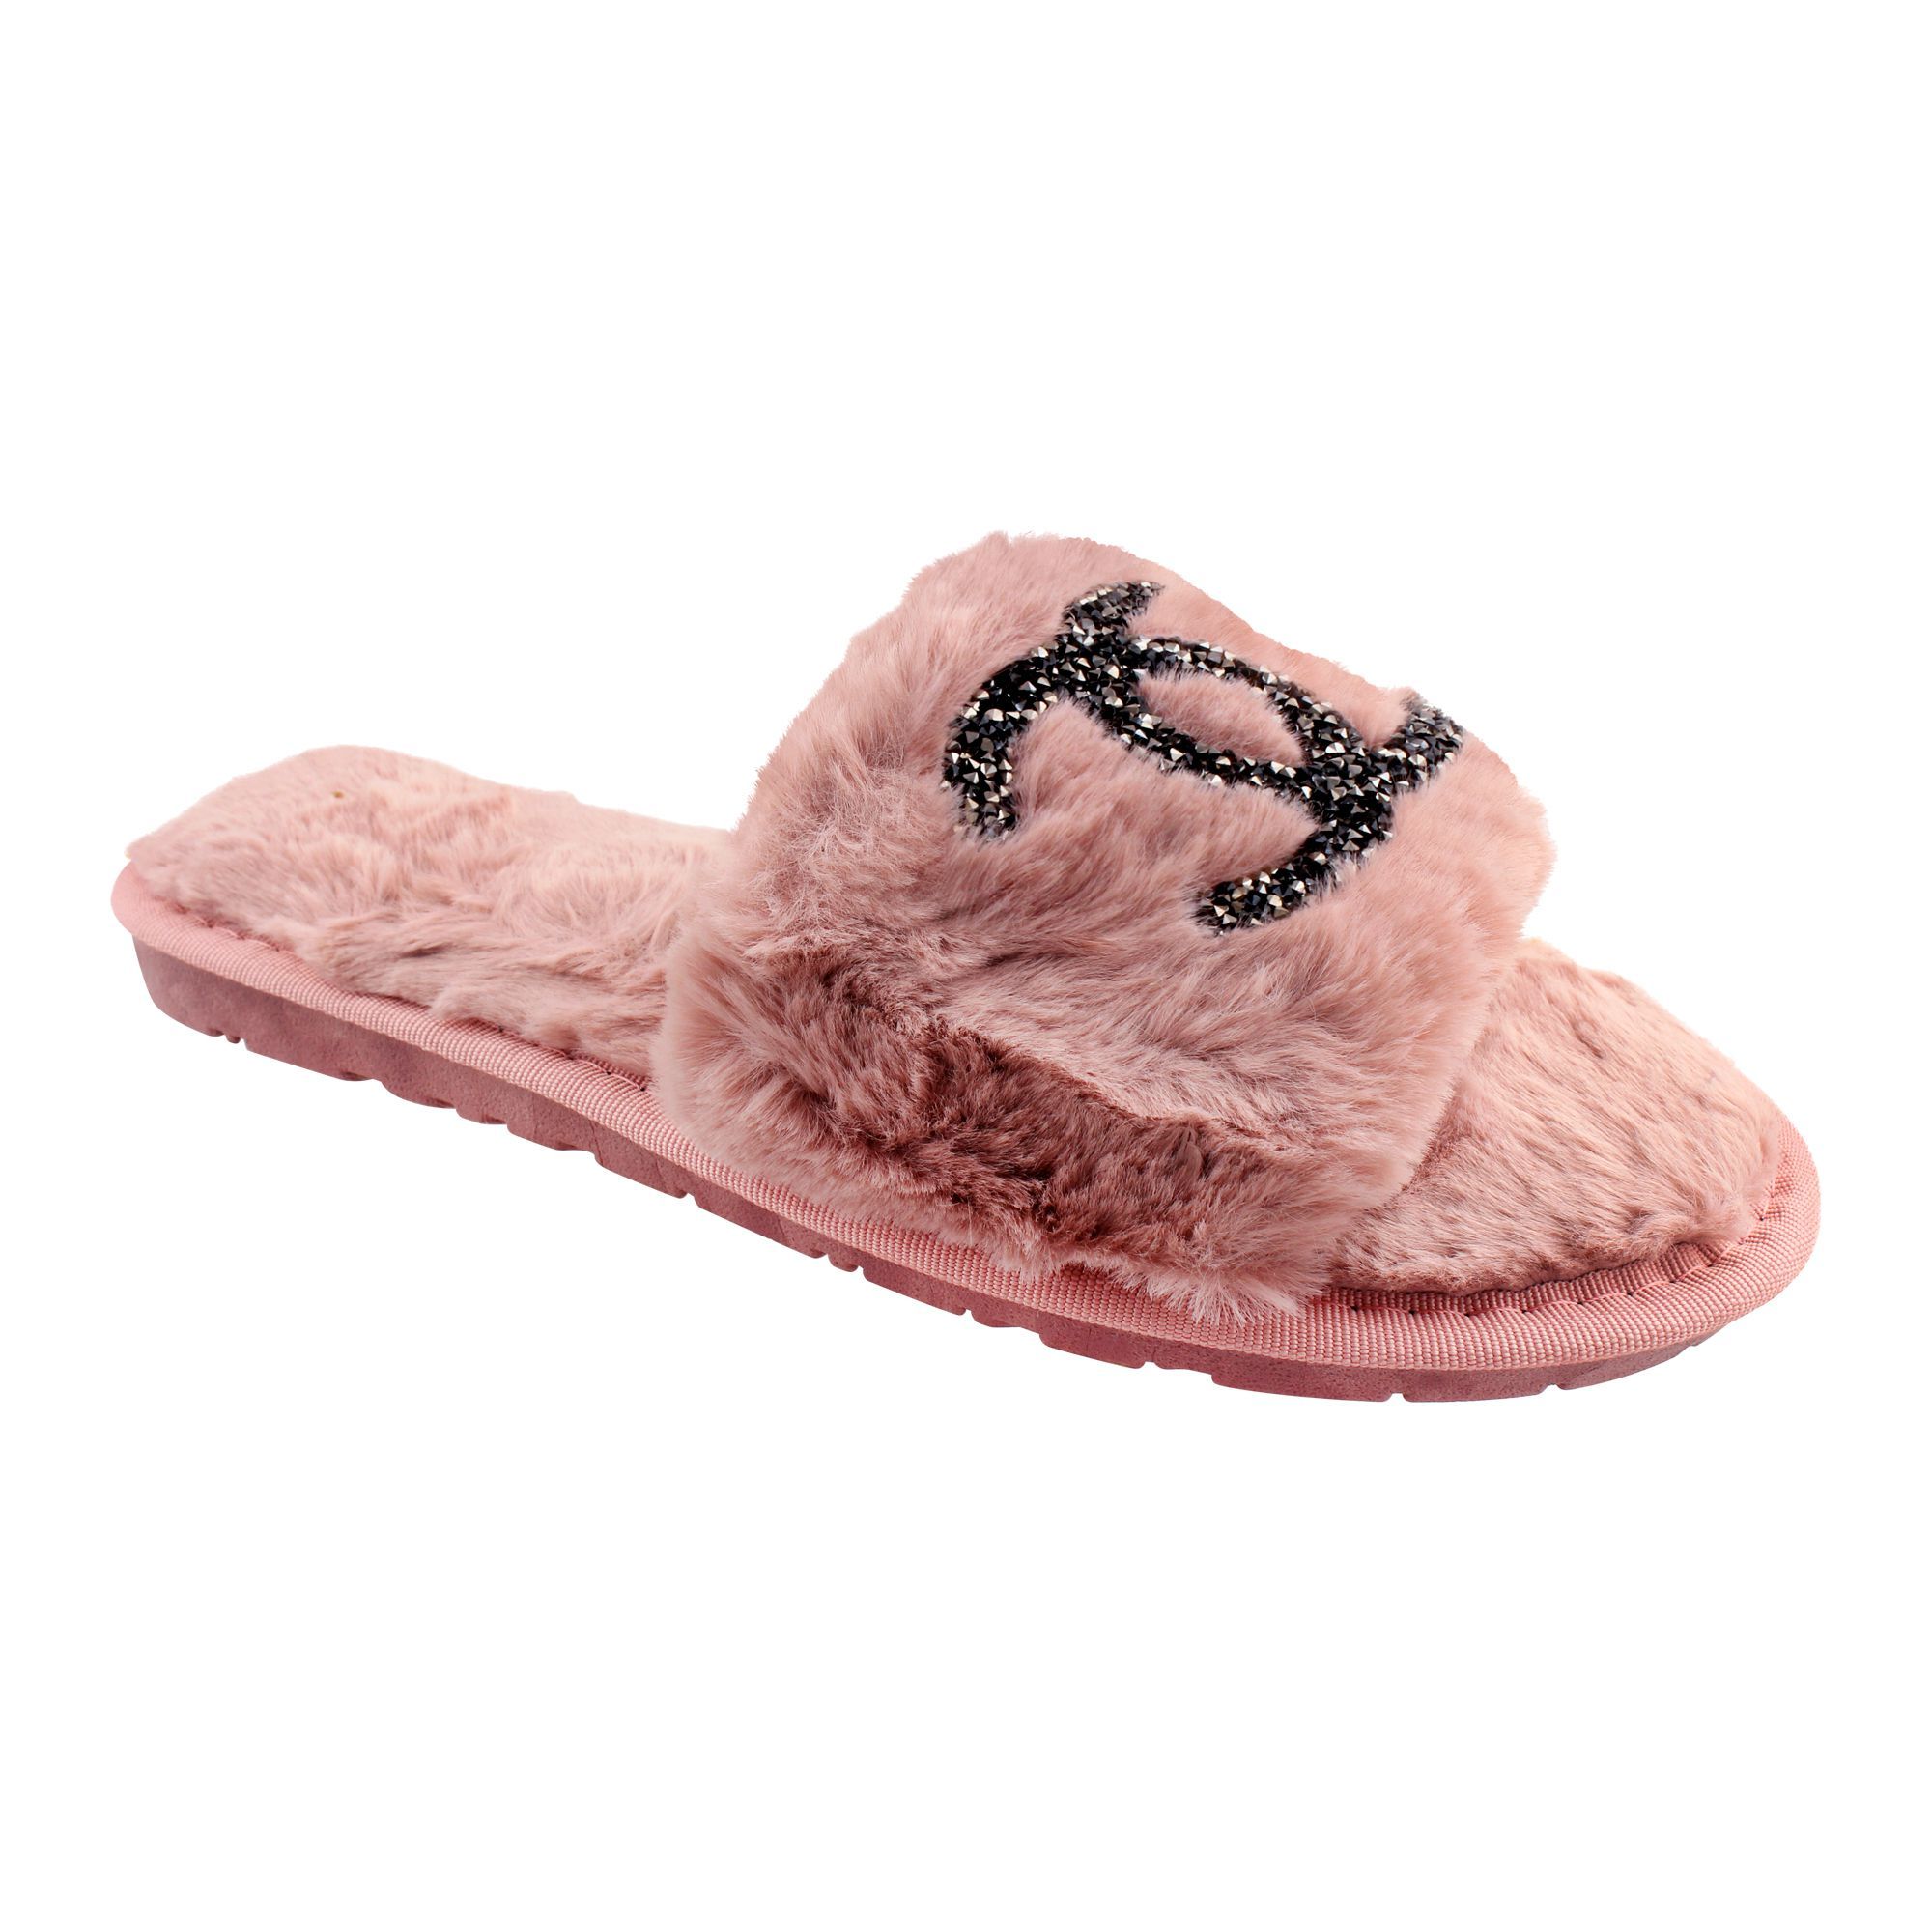 pink chanel slippers